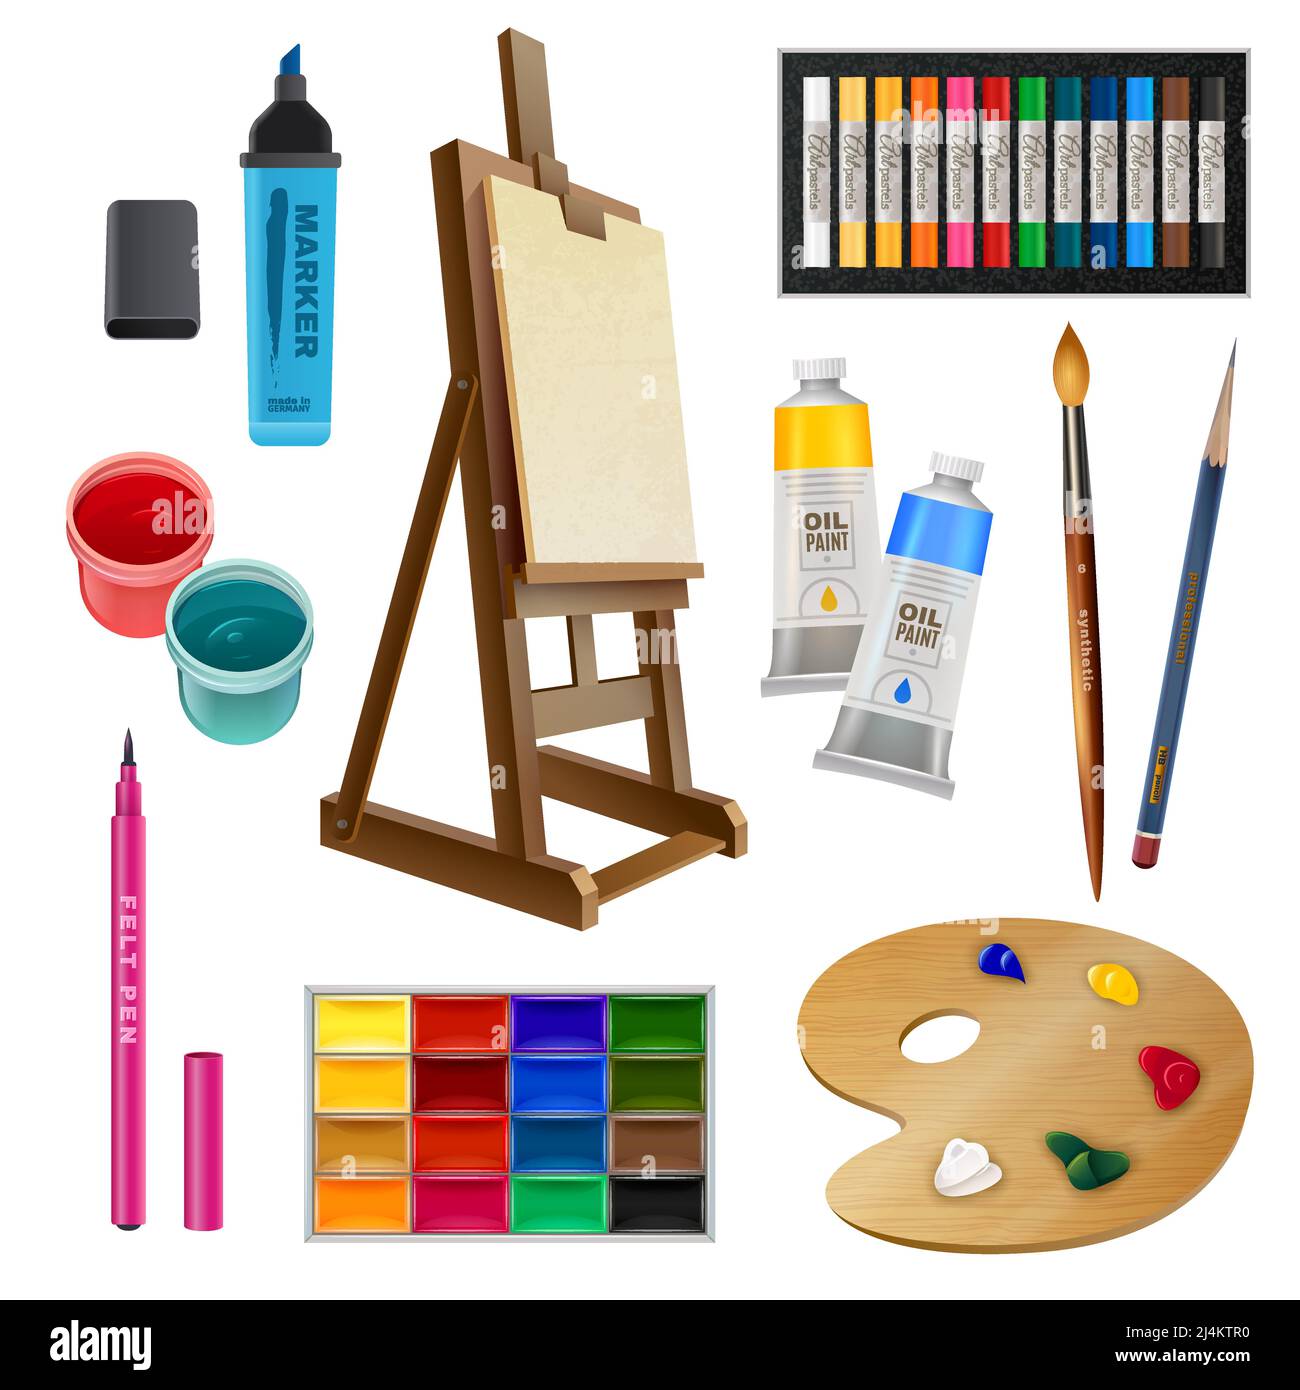 https://c8.alamy.com/comp/2J4KTR0/artistic-decorative-elements-of-tools-and-art-supplies-with-easel-palette-paints-brush-and-pencil-isolated-vector-illustration-2J4KTR0.jpg